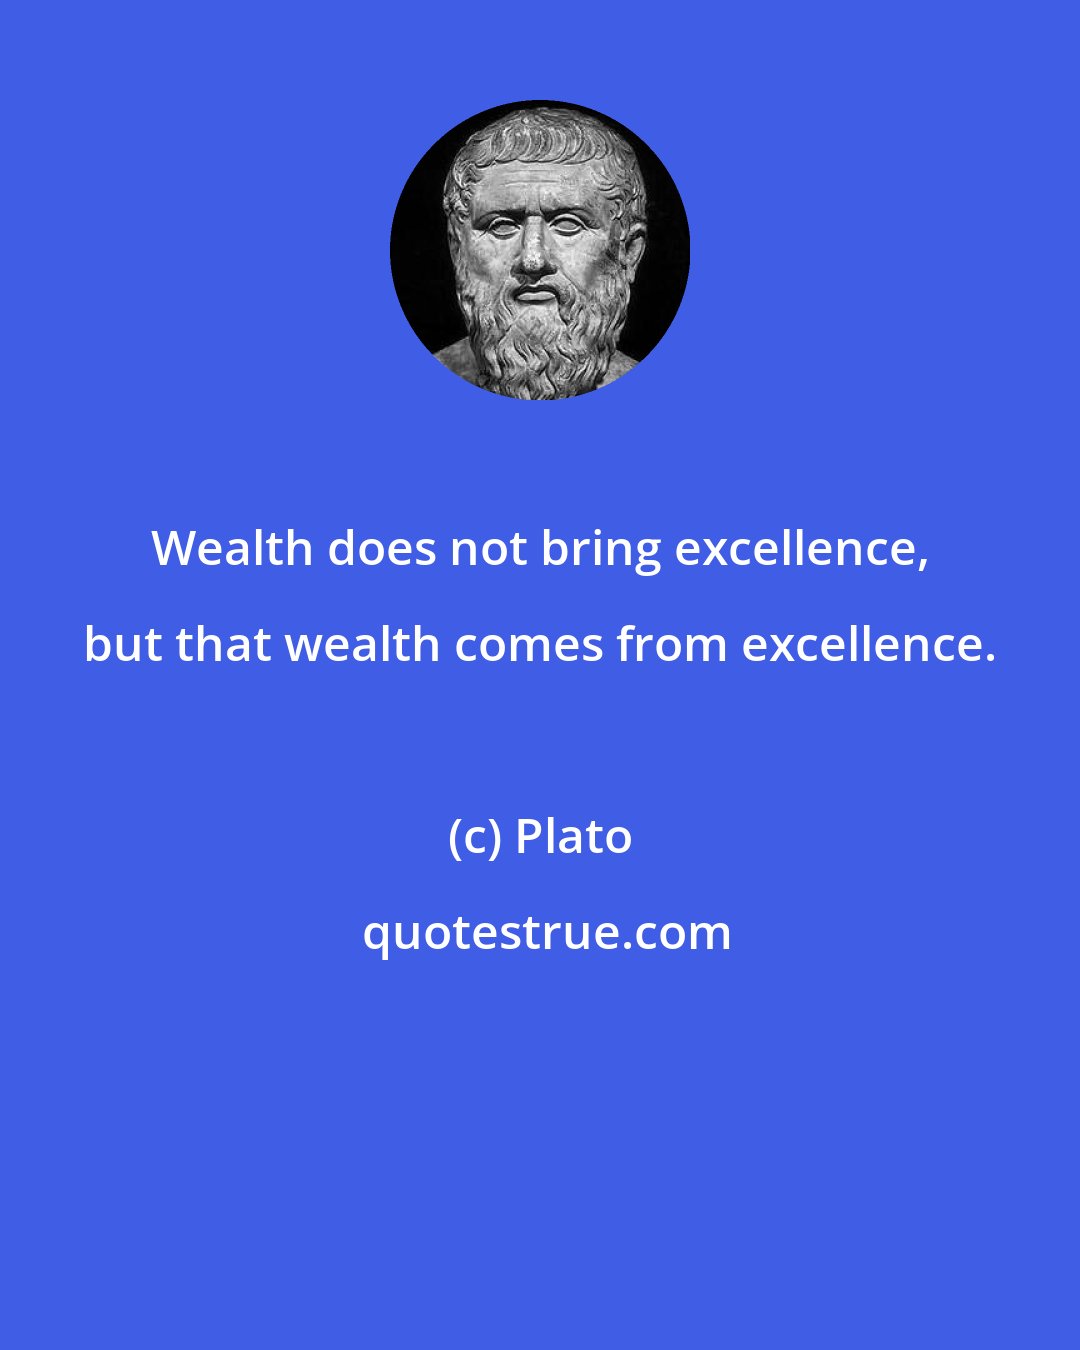 Plato: Wealth does not bring excellence, but that wealth comes from excellence.